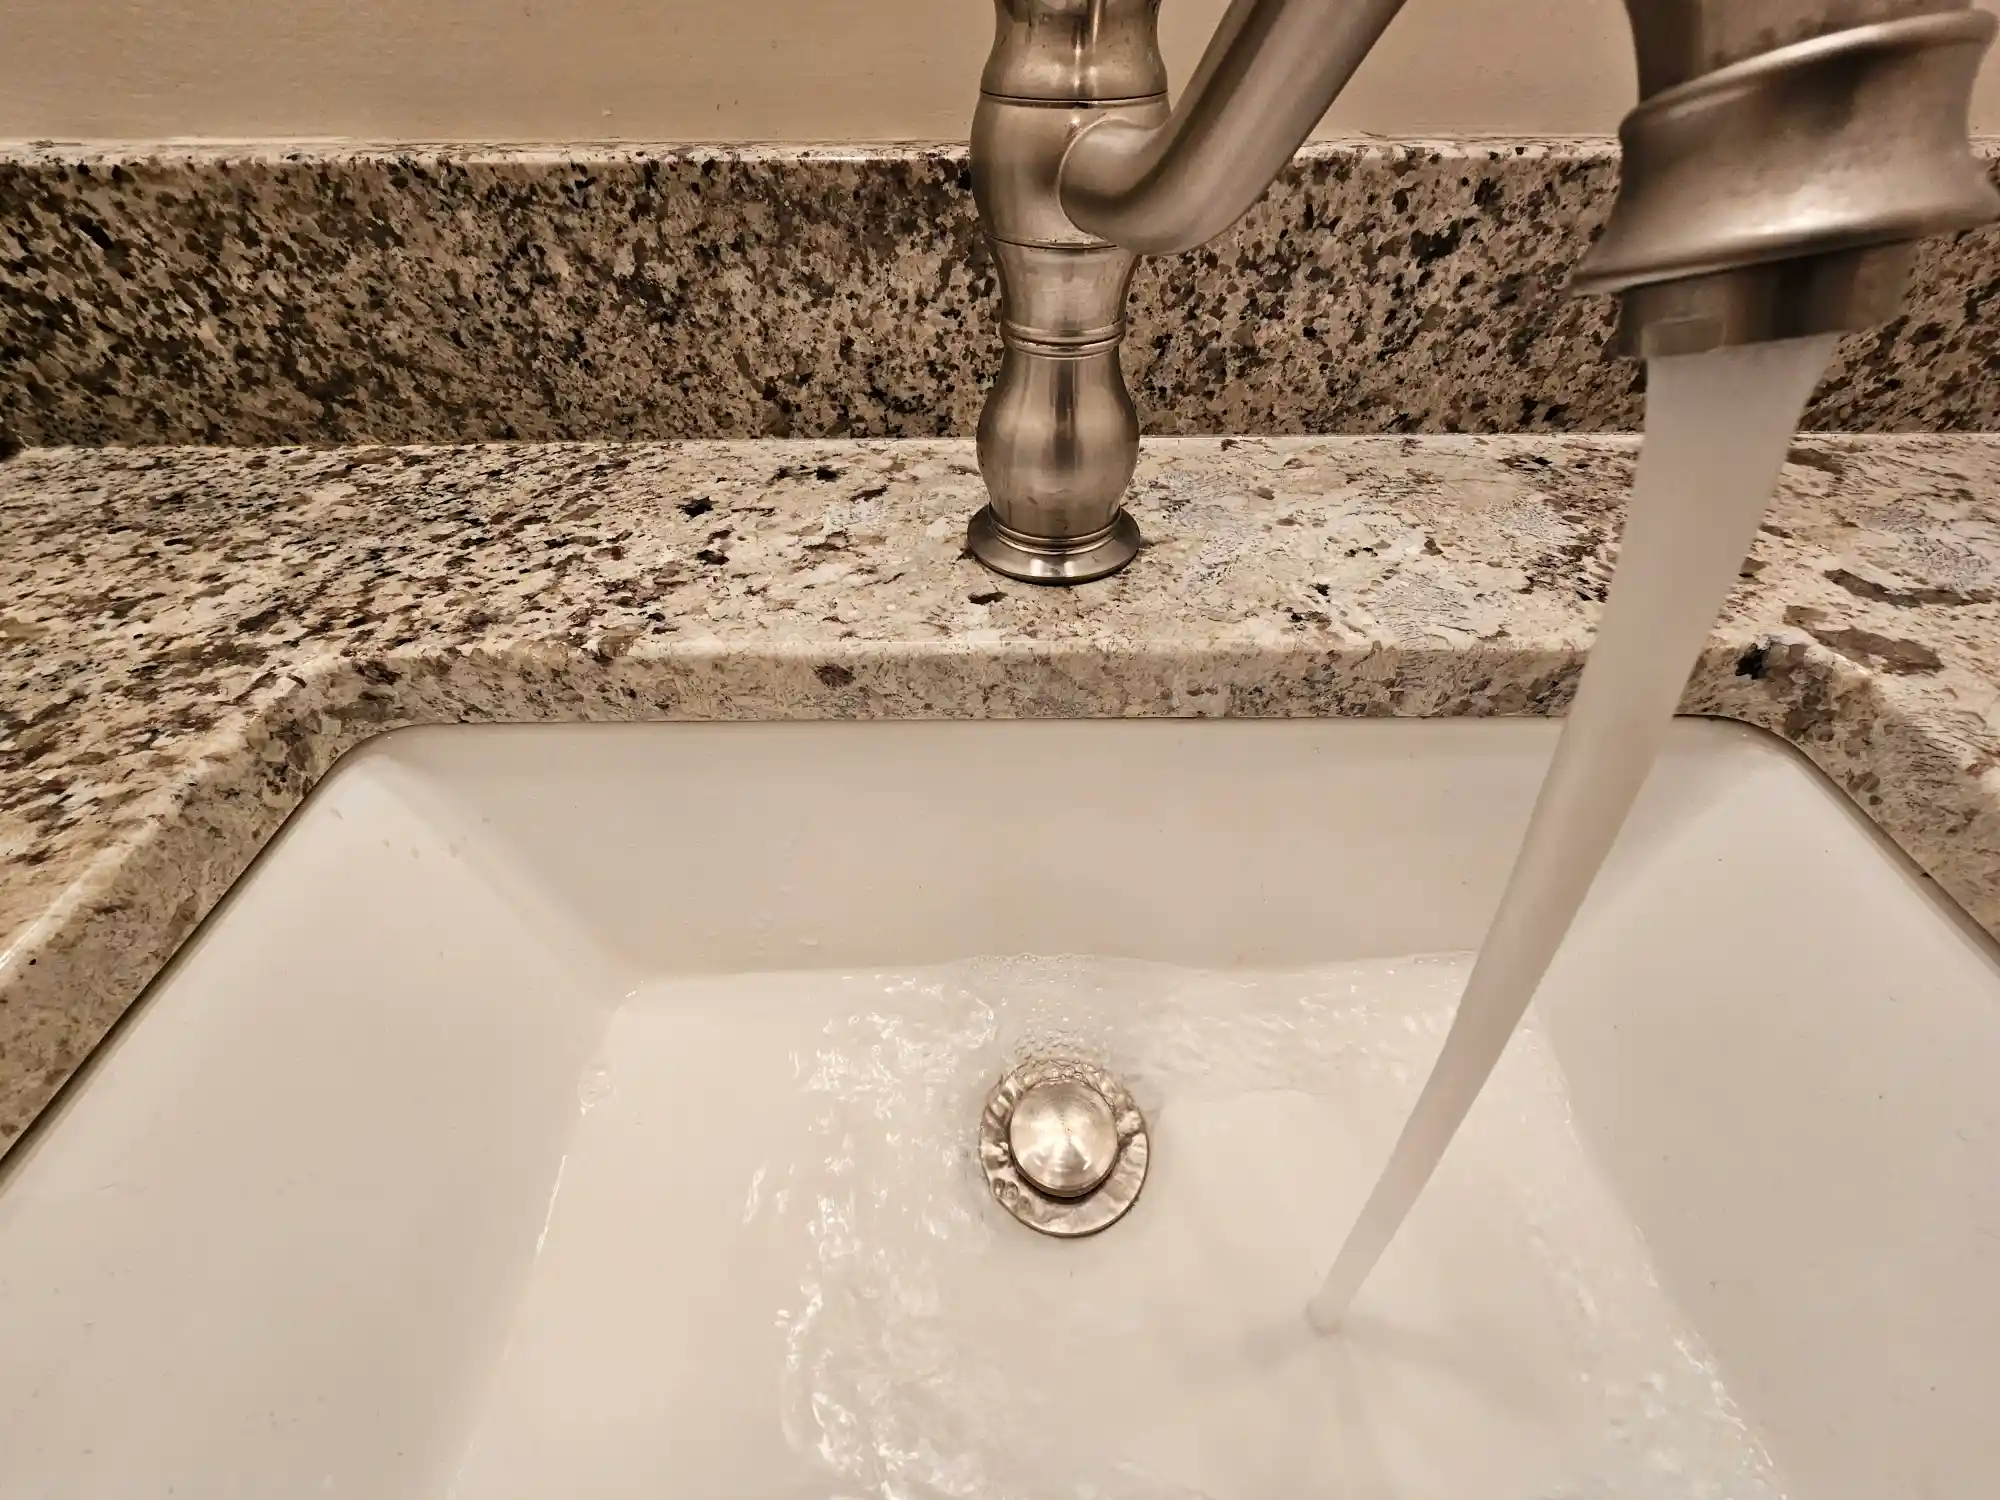 Silver bathroom faucet and sink